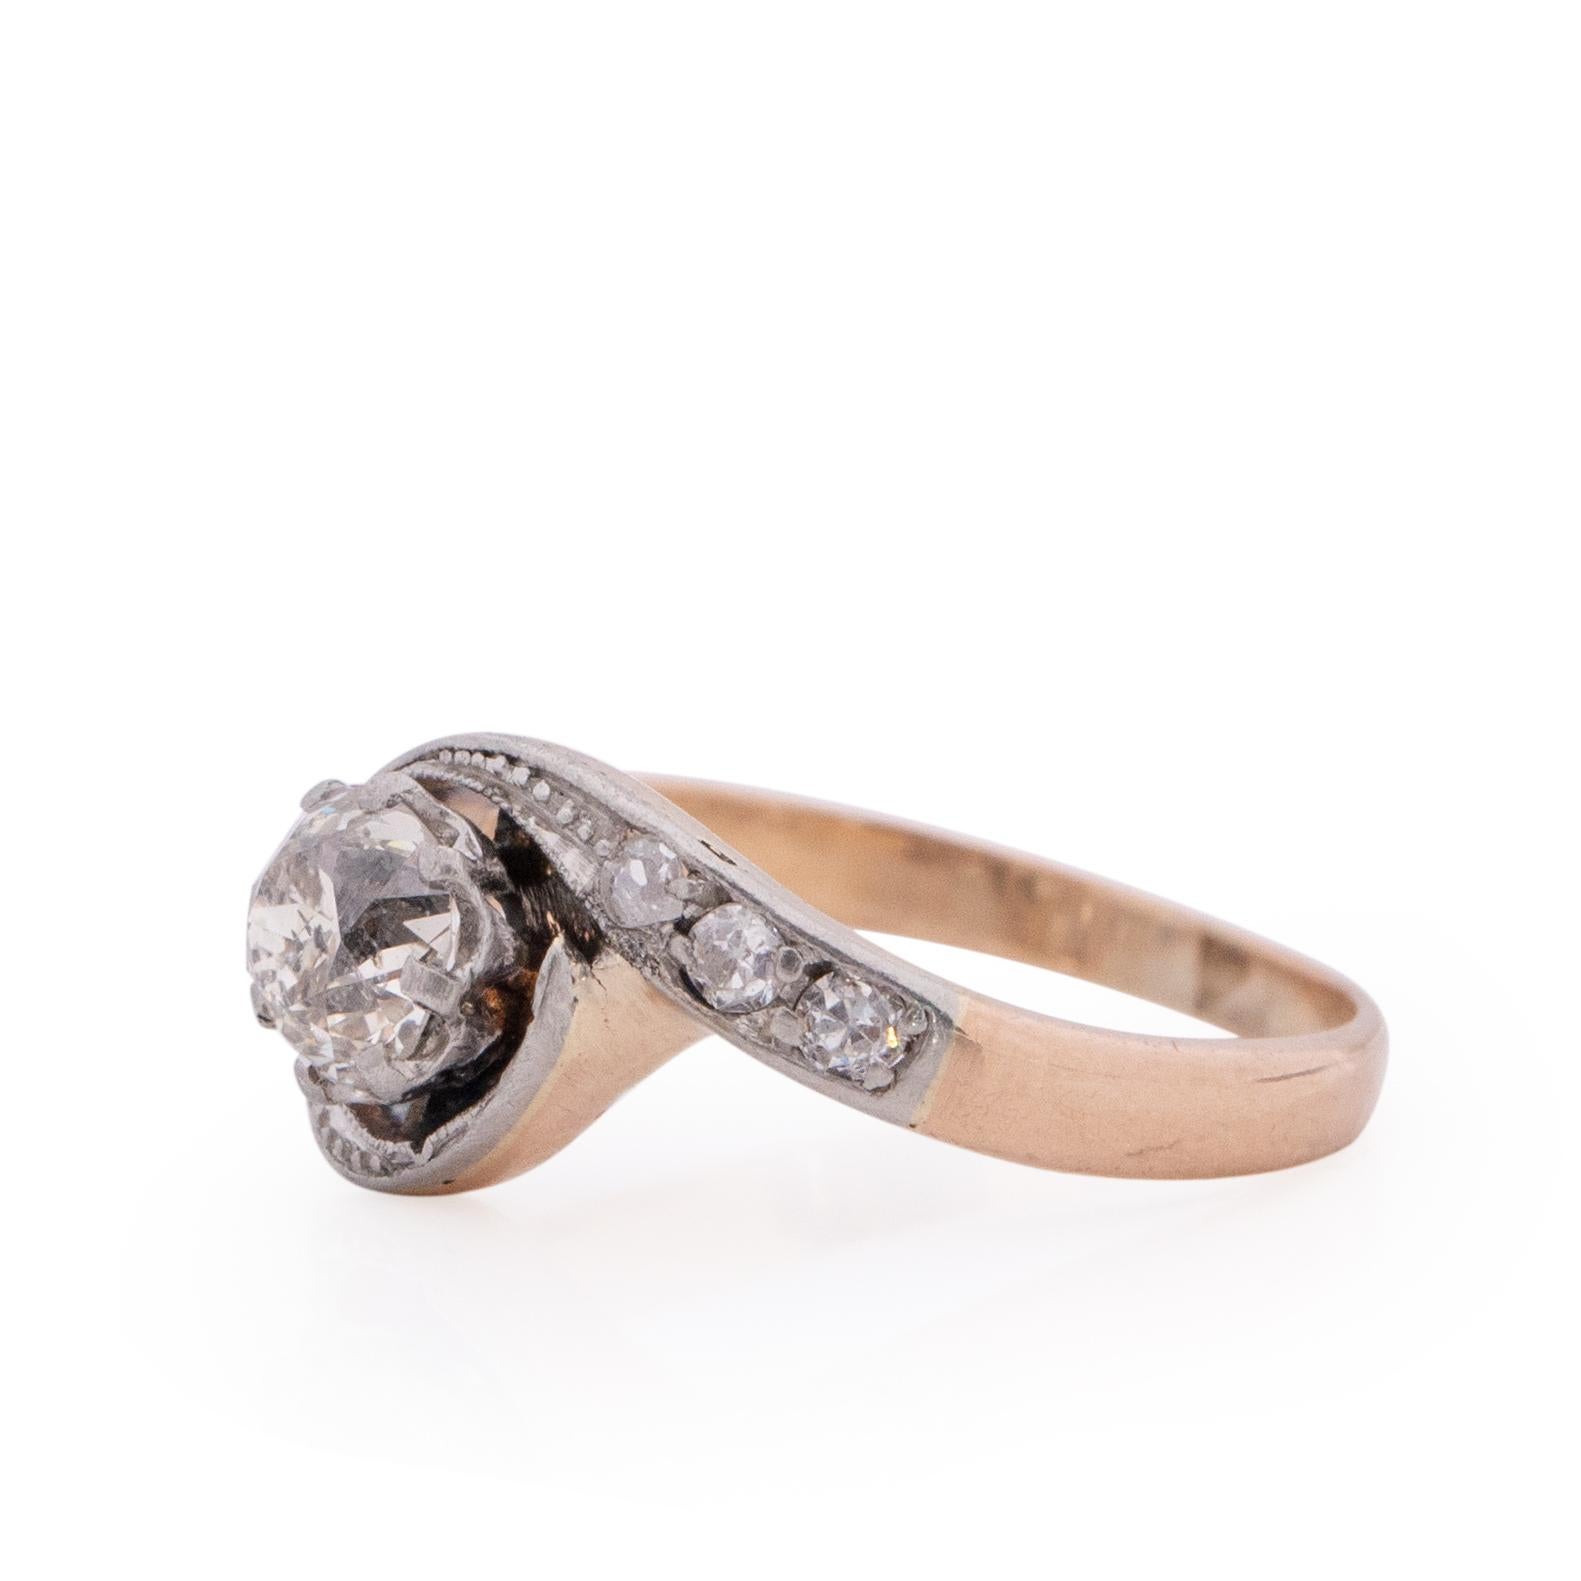 This is a classic example of a Victorian ring. Sitting the the two tone platinum and rose gold setting is a beautiful chunky old mine cut diamond. encompassing the center diamond is the winding shanks of the ring, in the platinum is six beautiful